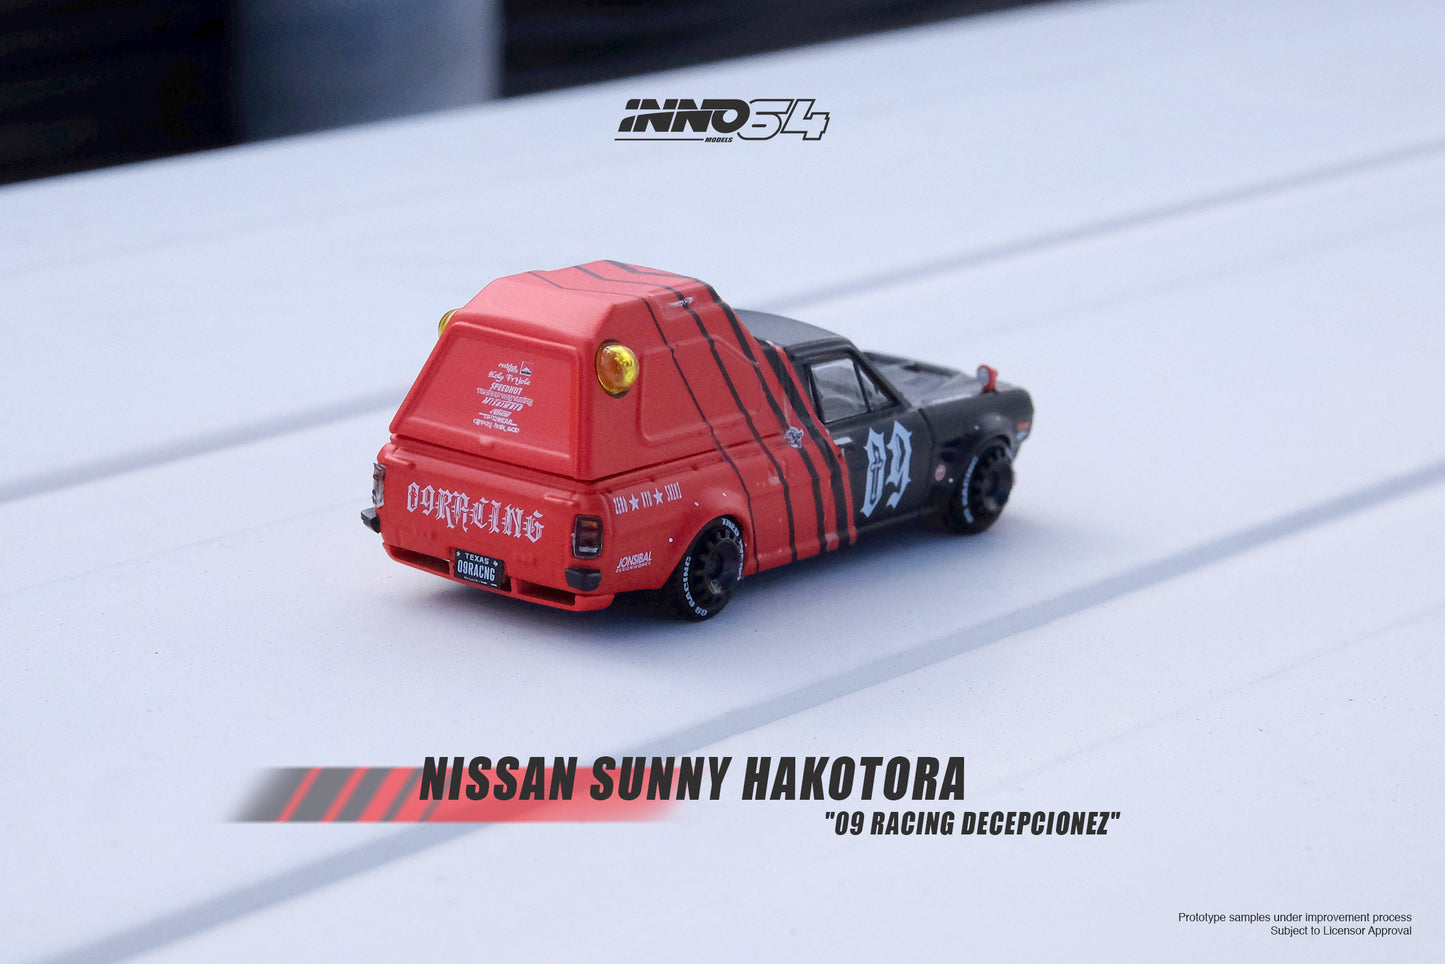 Inno64 1/64 NISSAN SUNNY HAKOTORA "09 RACING" DECEPCIONEZ Special Packaging and Key Chain gift included